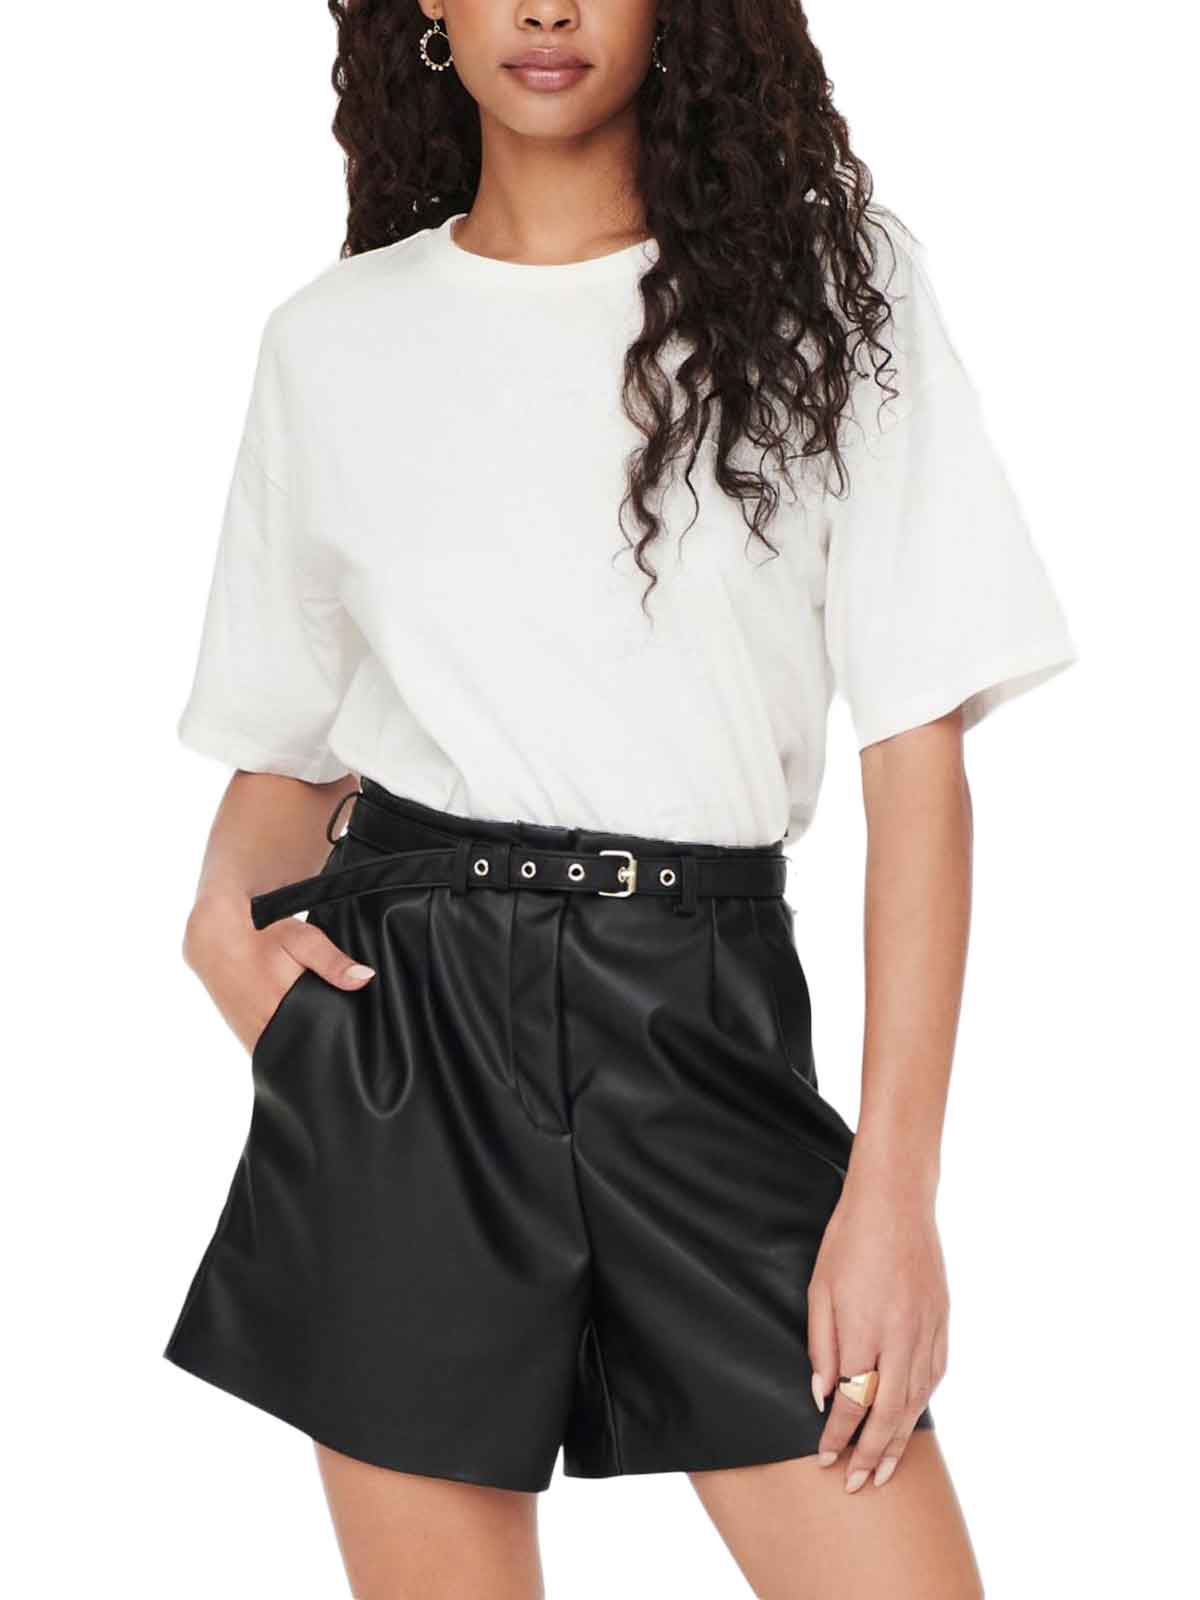   Only | Heidi Faux Leather Shorts |  